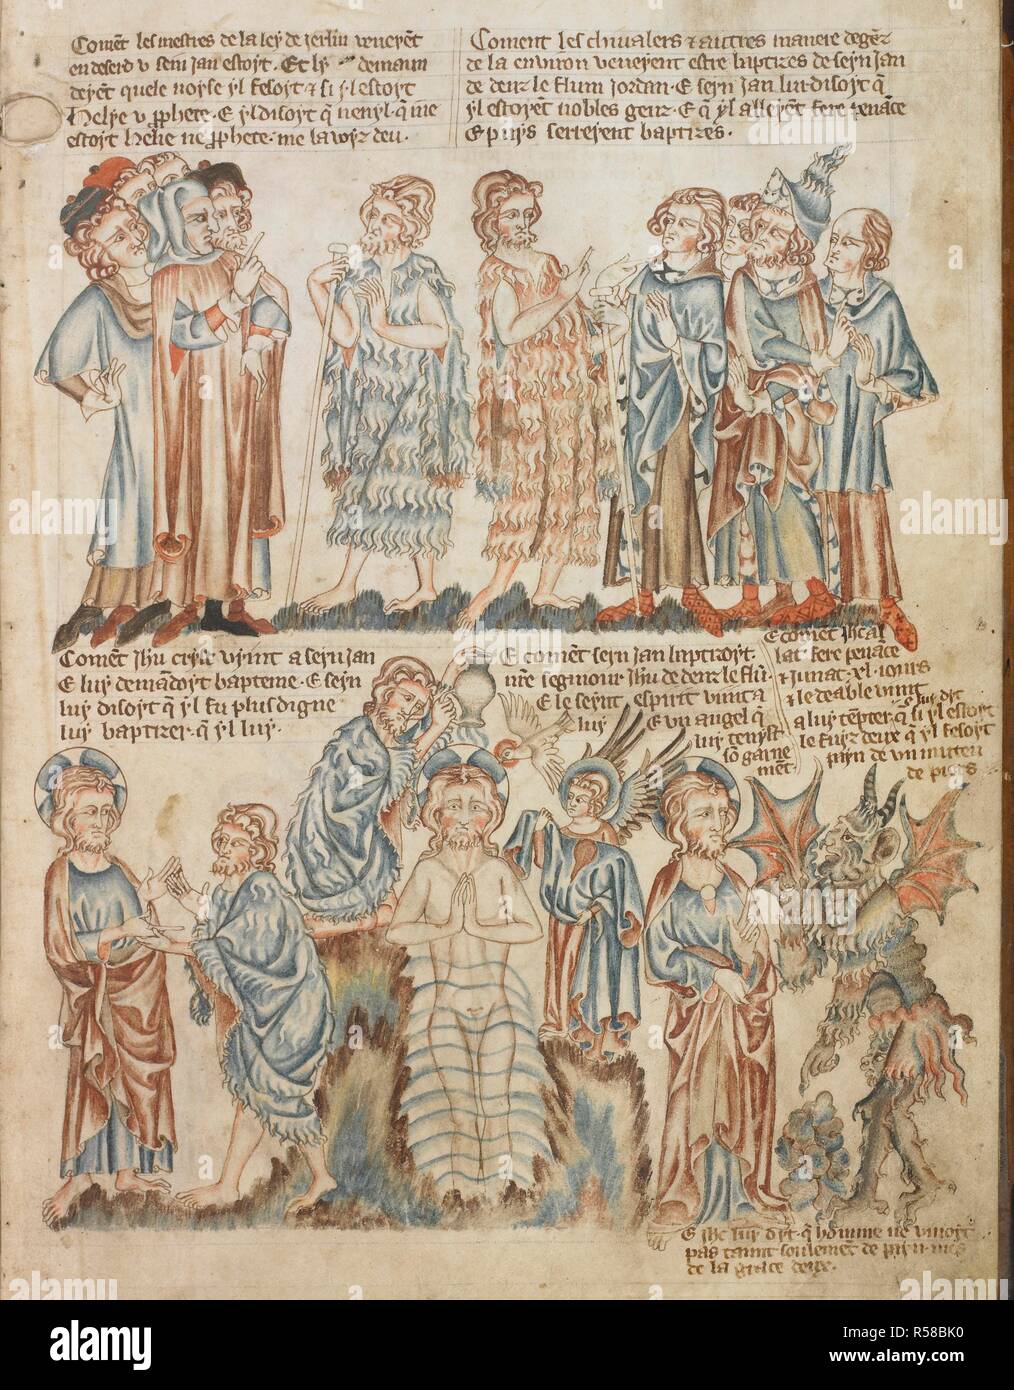 St John the Baptist preaching to five scholars and to wealthy nobles; the baptism of Christ; the Devil tempting Christ. Holkham Bible Picture Book. England, circa 1320-1330. Source: Add. 47682, f.19. Stock Photo